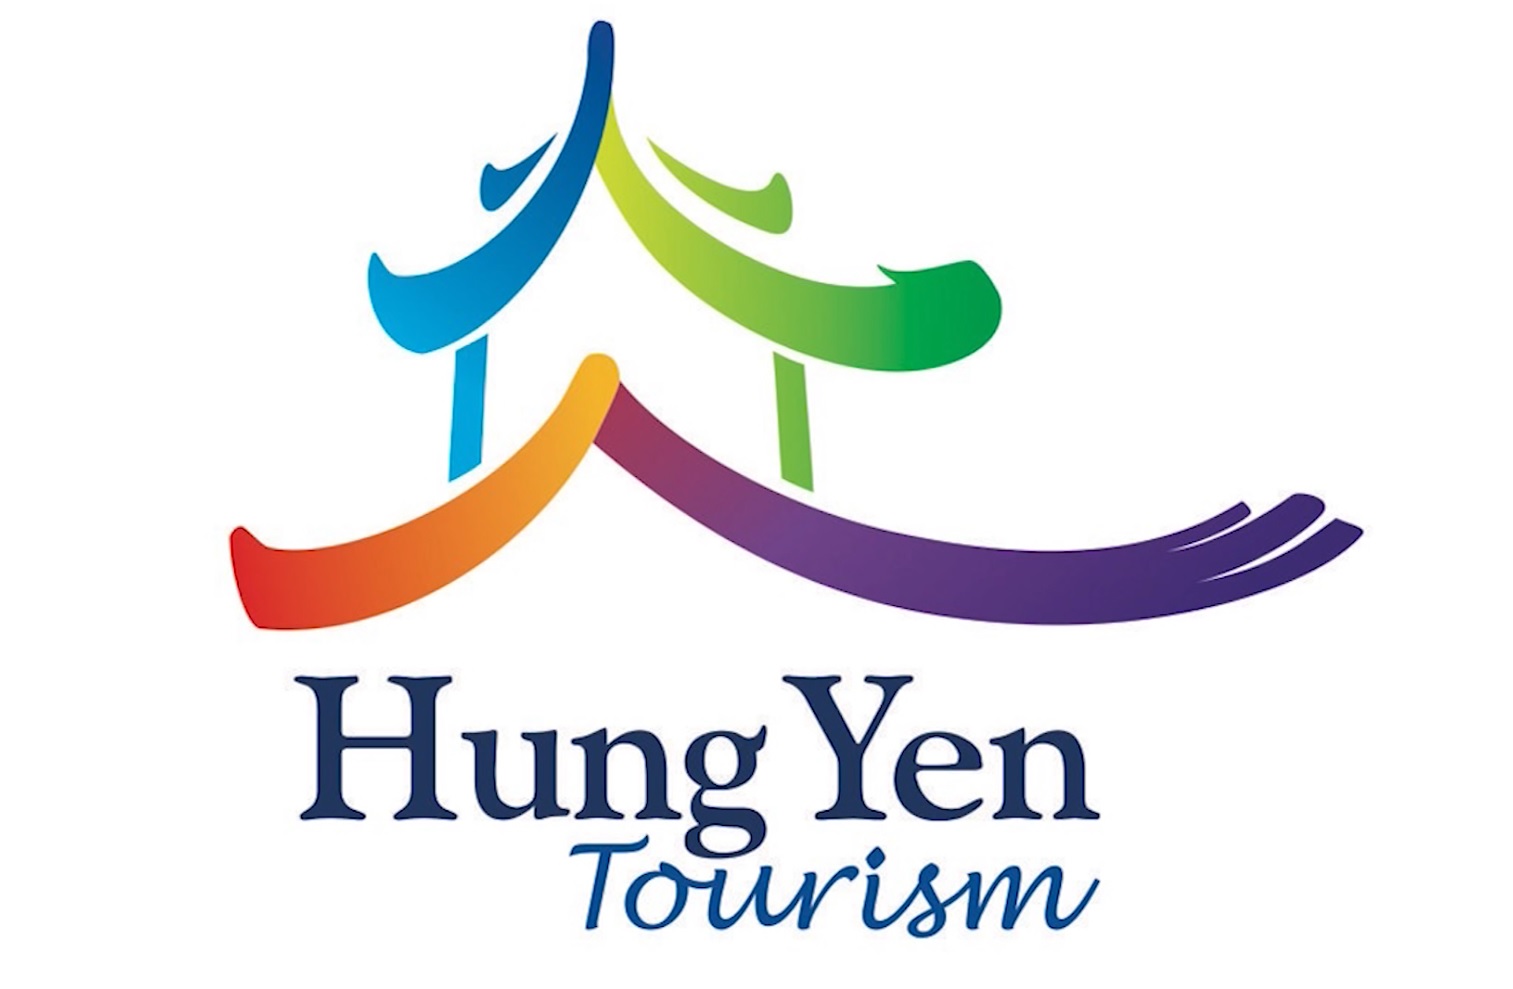 HUNG YEN TOURISM INFORMATION AND PROMOTION CENTER